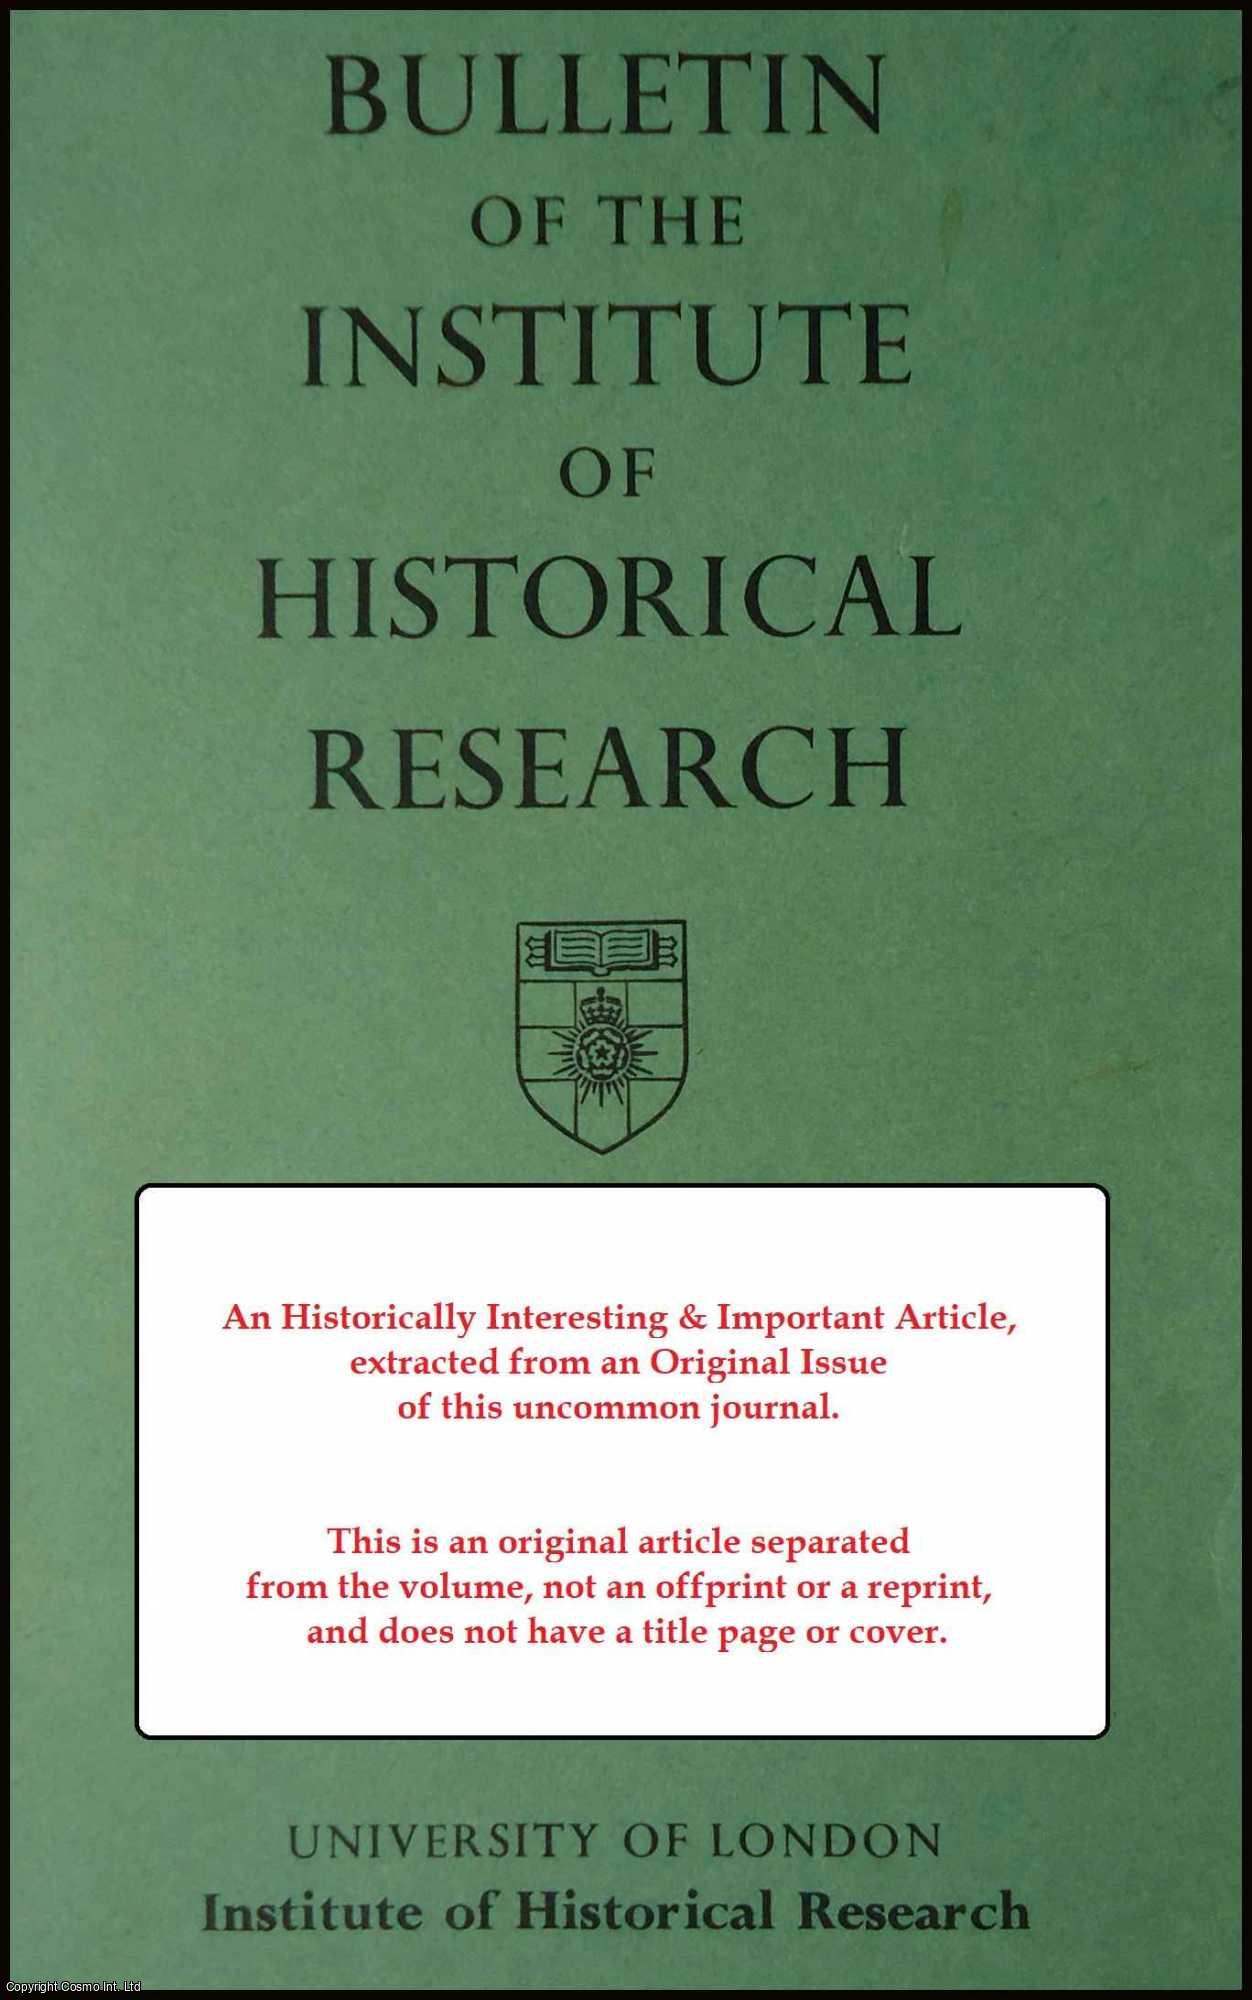 Not Stated - General Lists of Books Printed in England: The Stationers Register (from 1557), Book Trade Lists (from 1595) and Bibliographies. An original article from the Bulletin of the Institute of Historical Research, 1935.